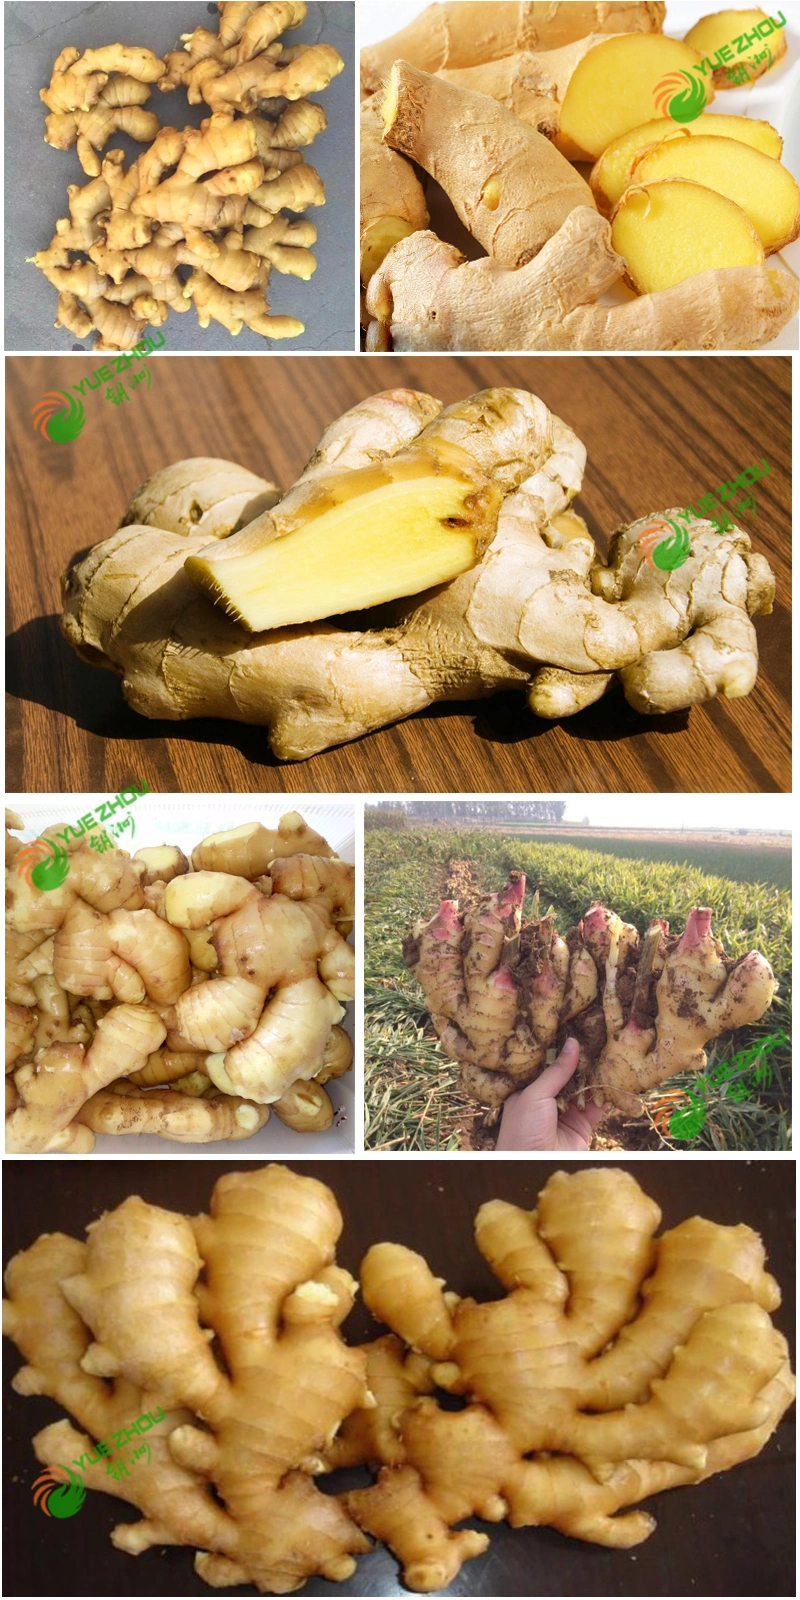 Fresh Ginger Chinese Ginger 2018 New Crop Ginger with Price